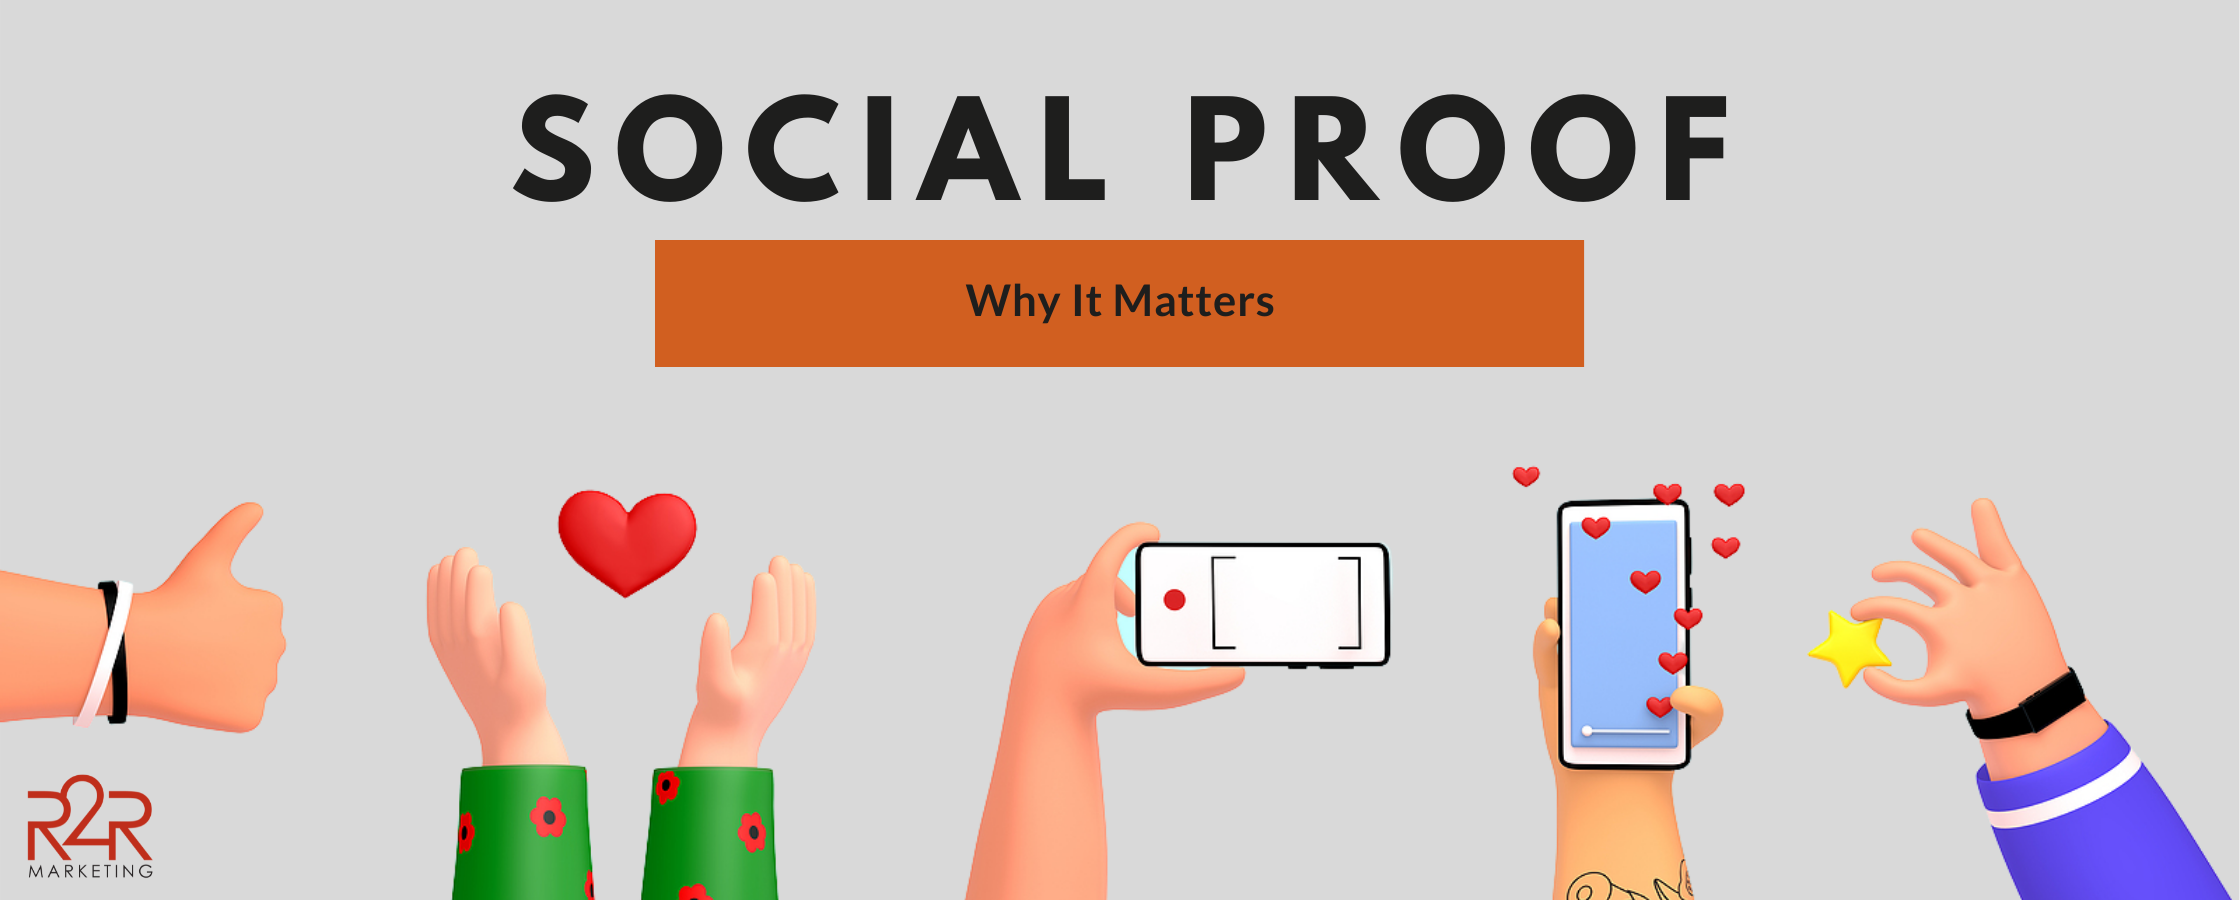 Social Proof: Why It Matters